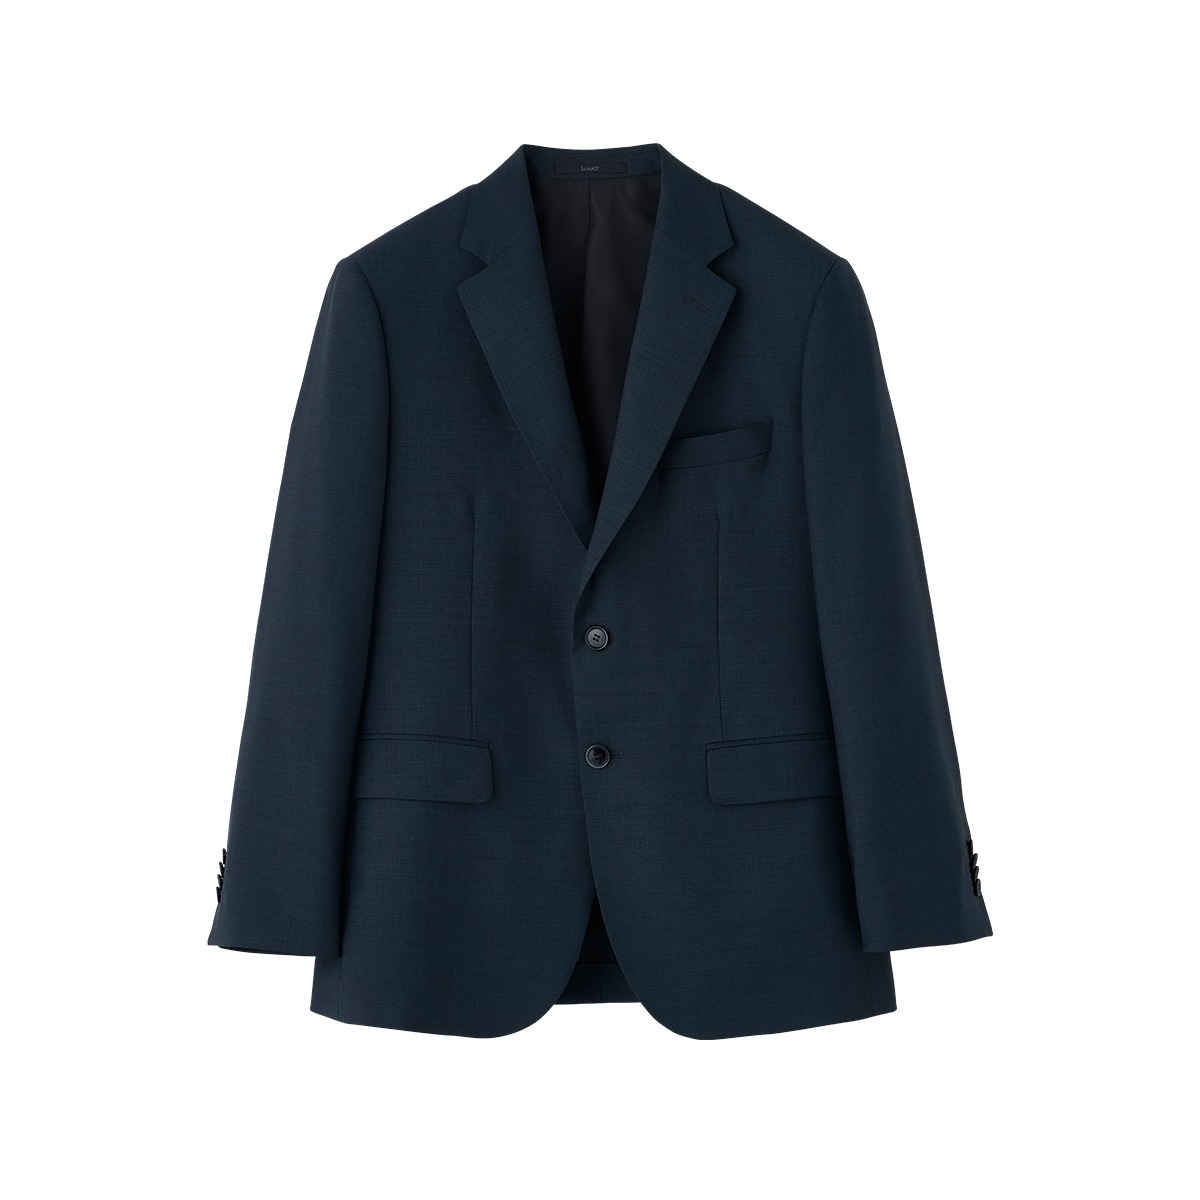 Teal Navy Solid Wool Light Weight Suit